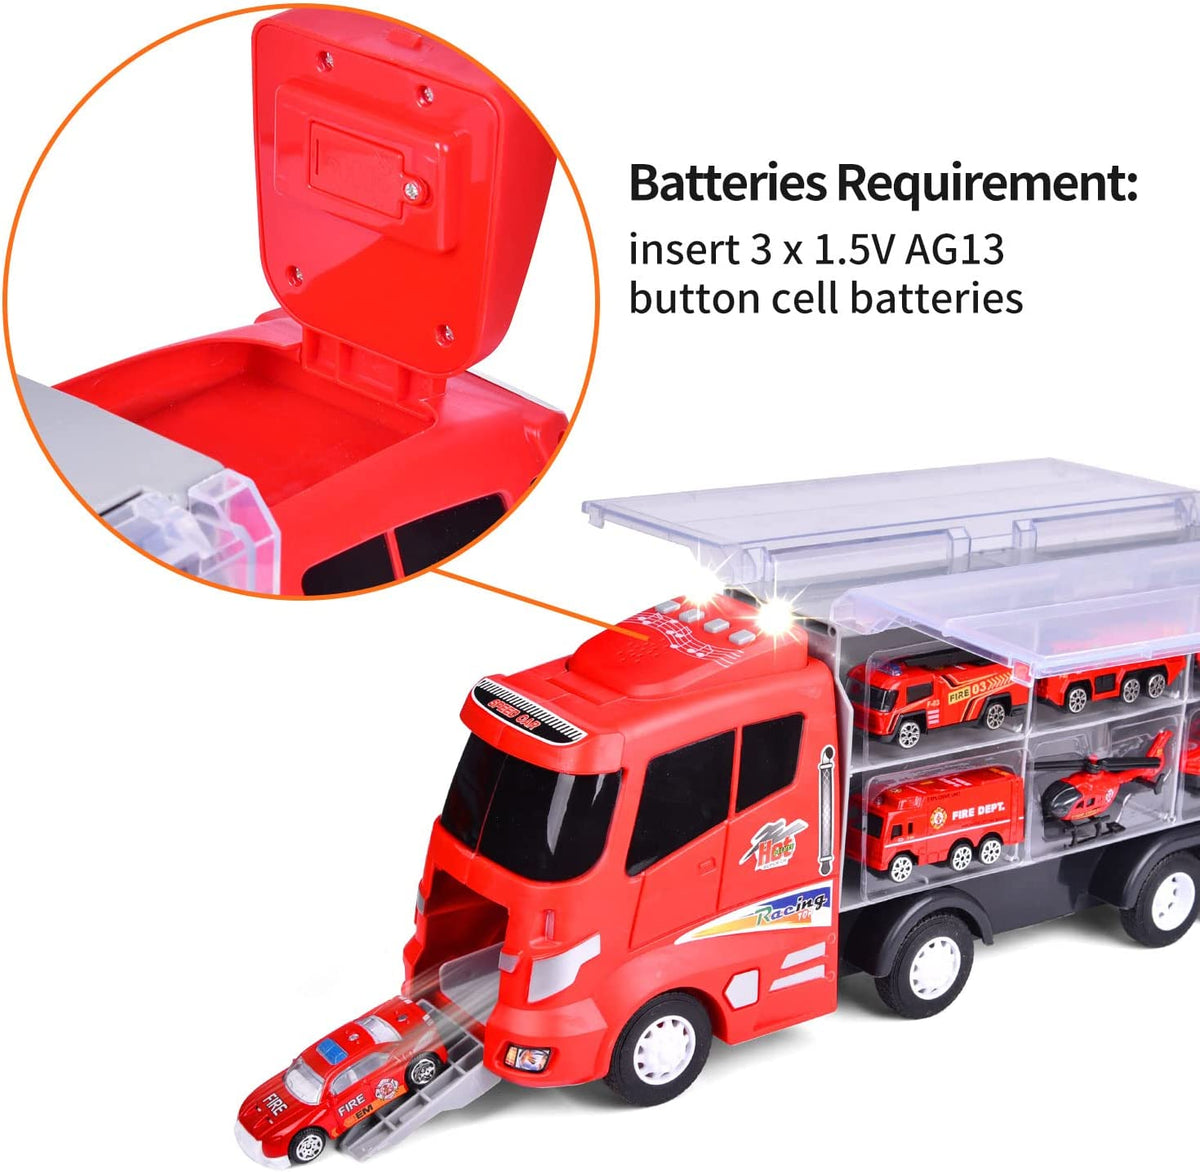 Die-Cast Fire Truck Transport Cover